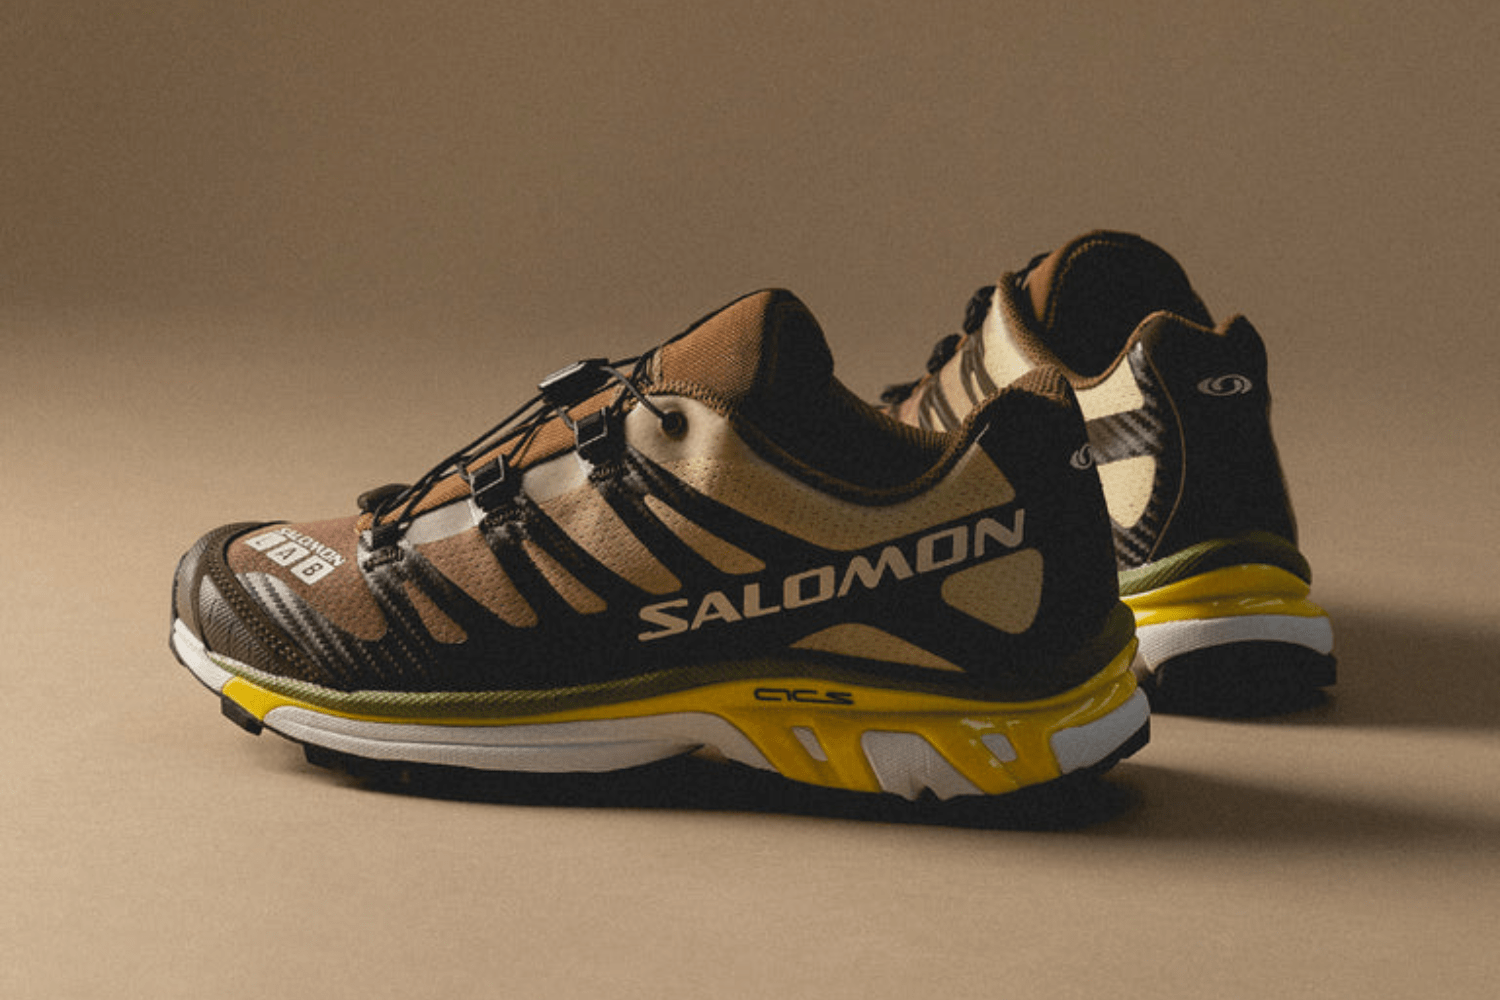 Meet Salomon: from the Alps to the streets